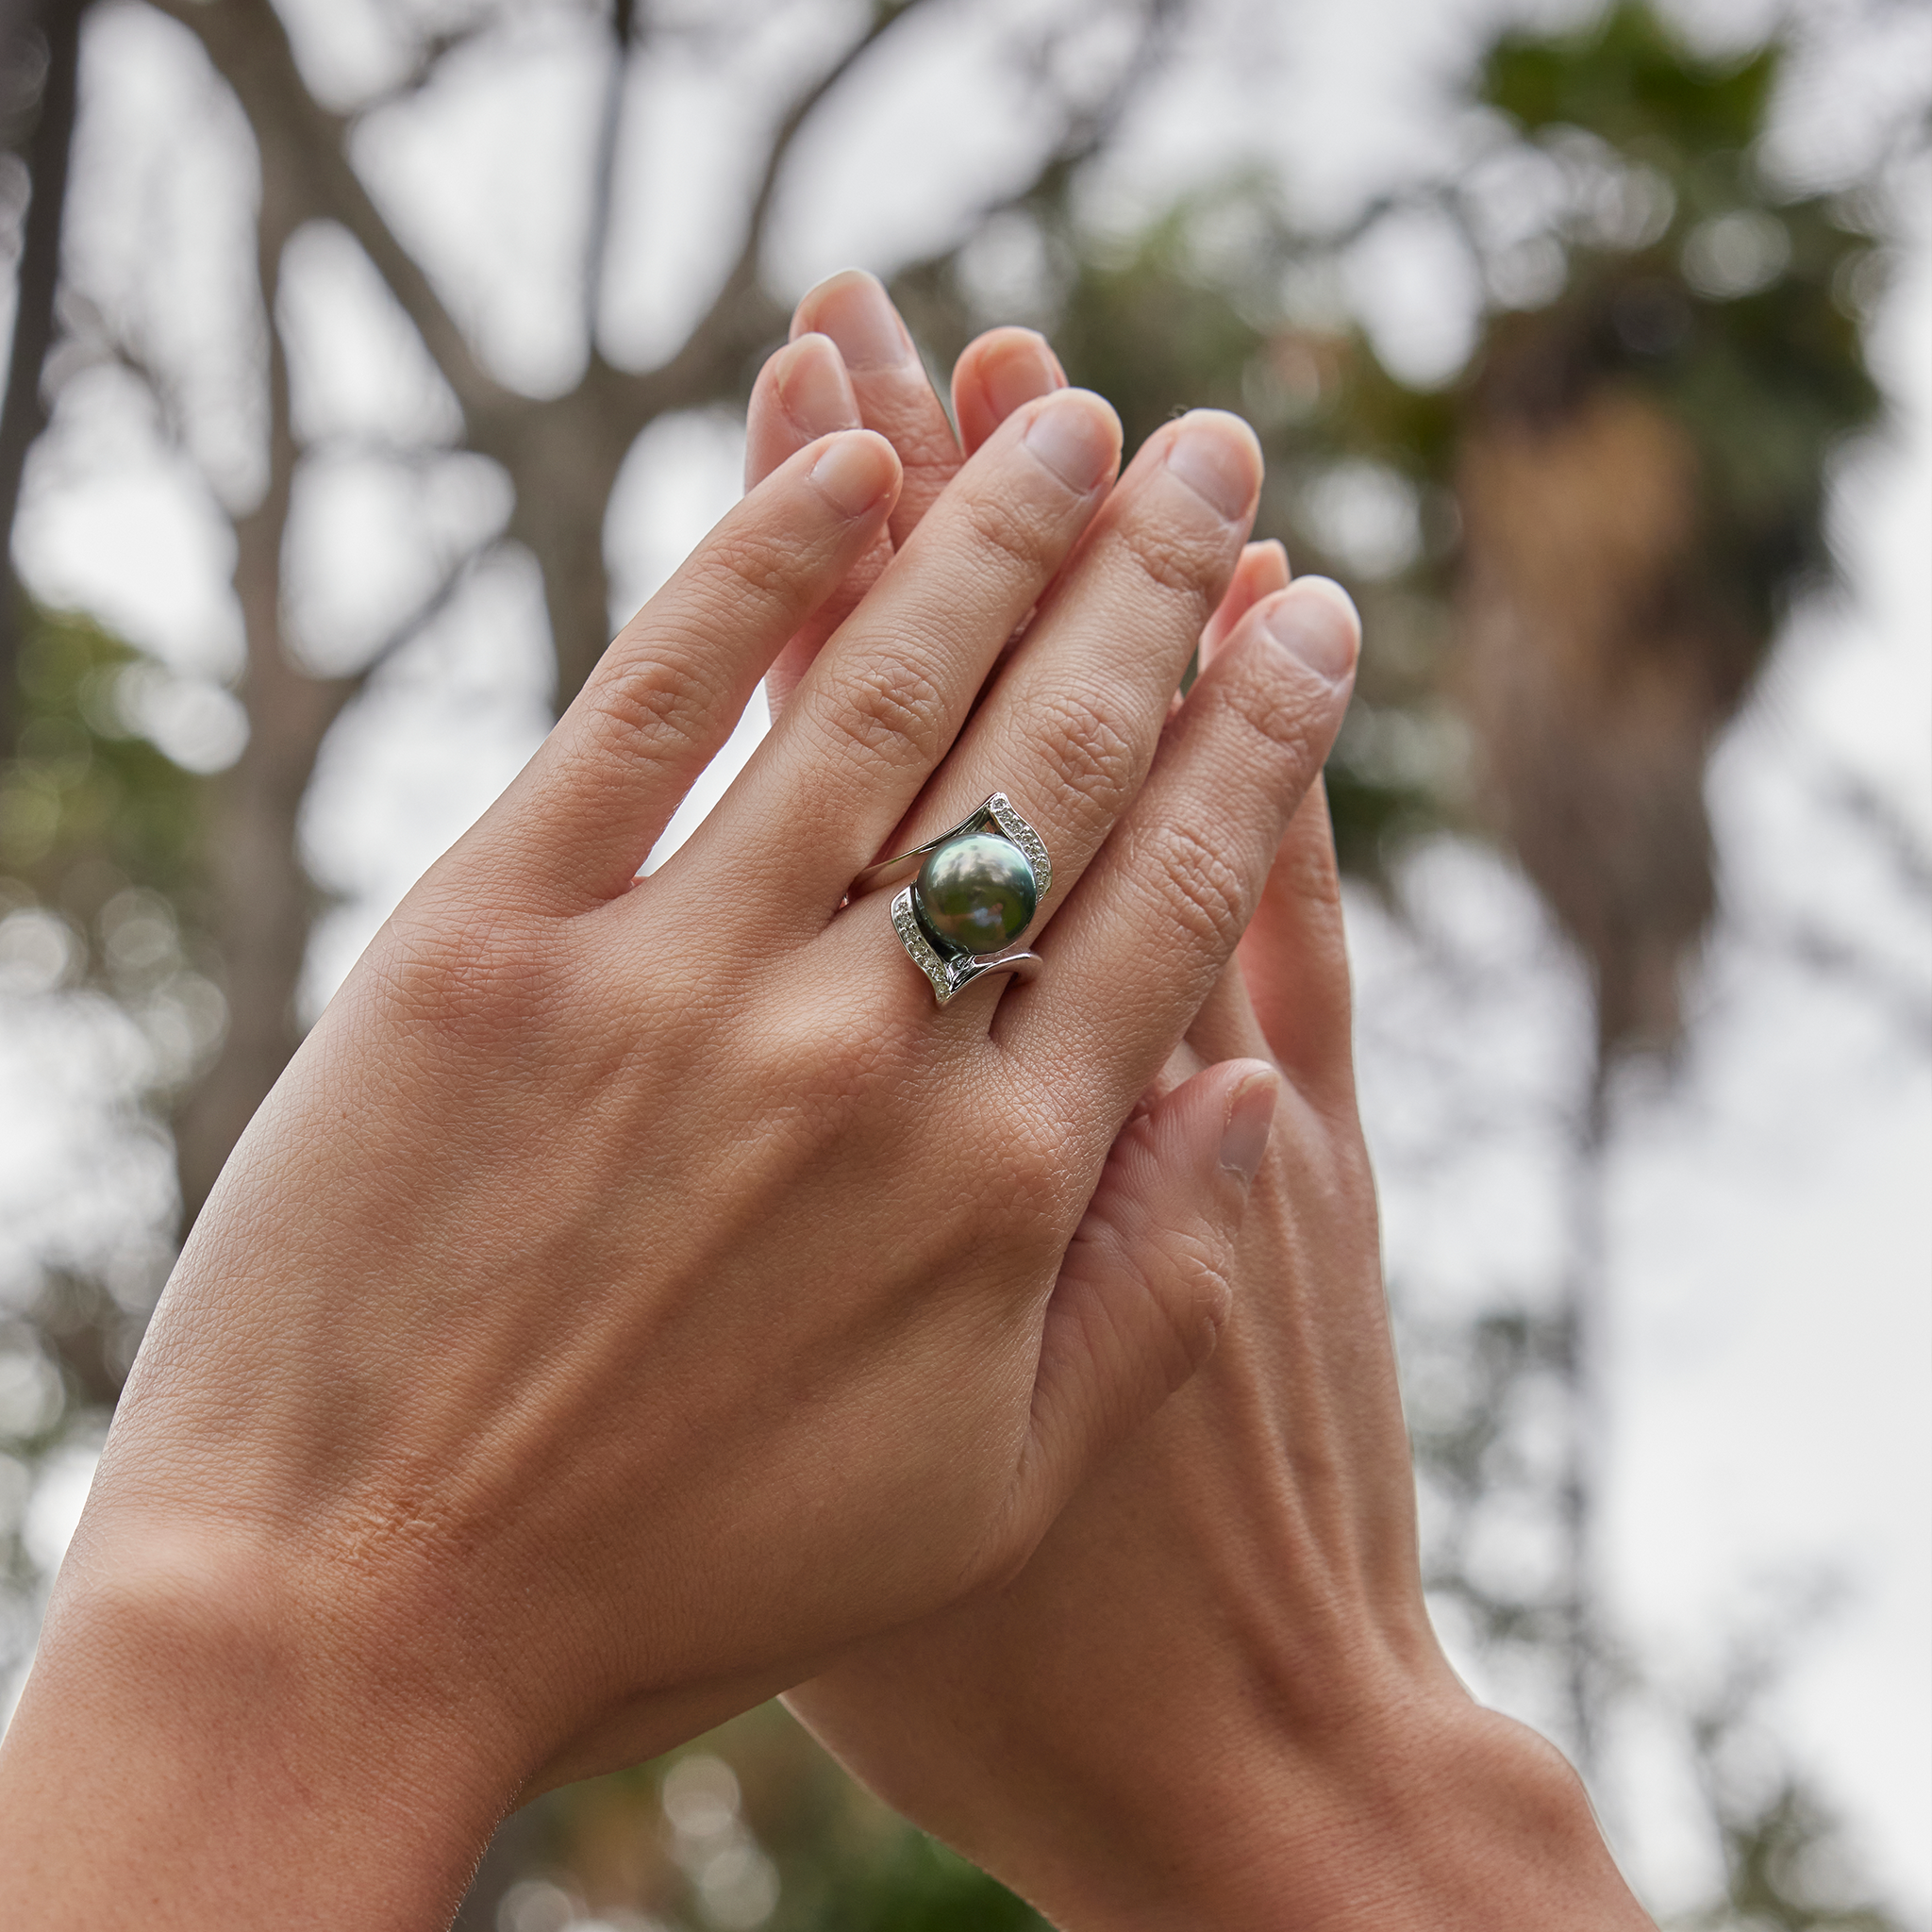 Hands together with Tahitian Black Pearl Ring in White Gold with Diamonds